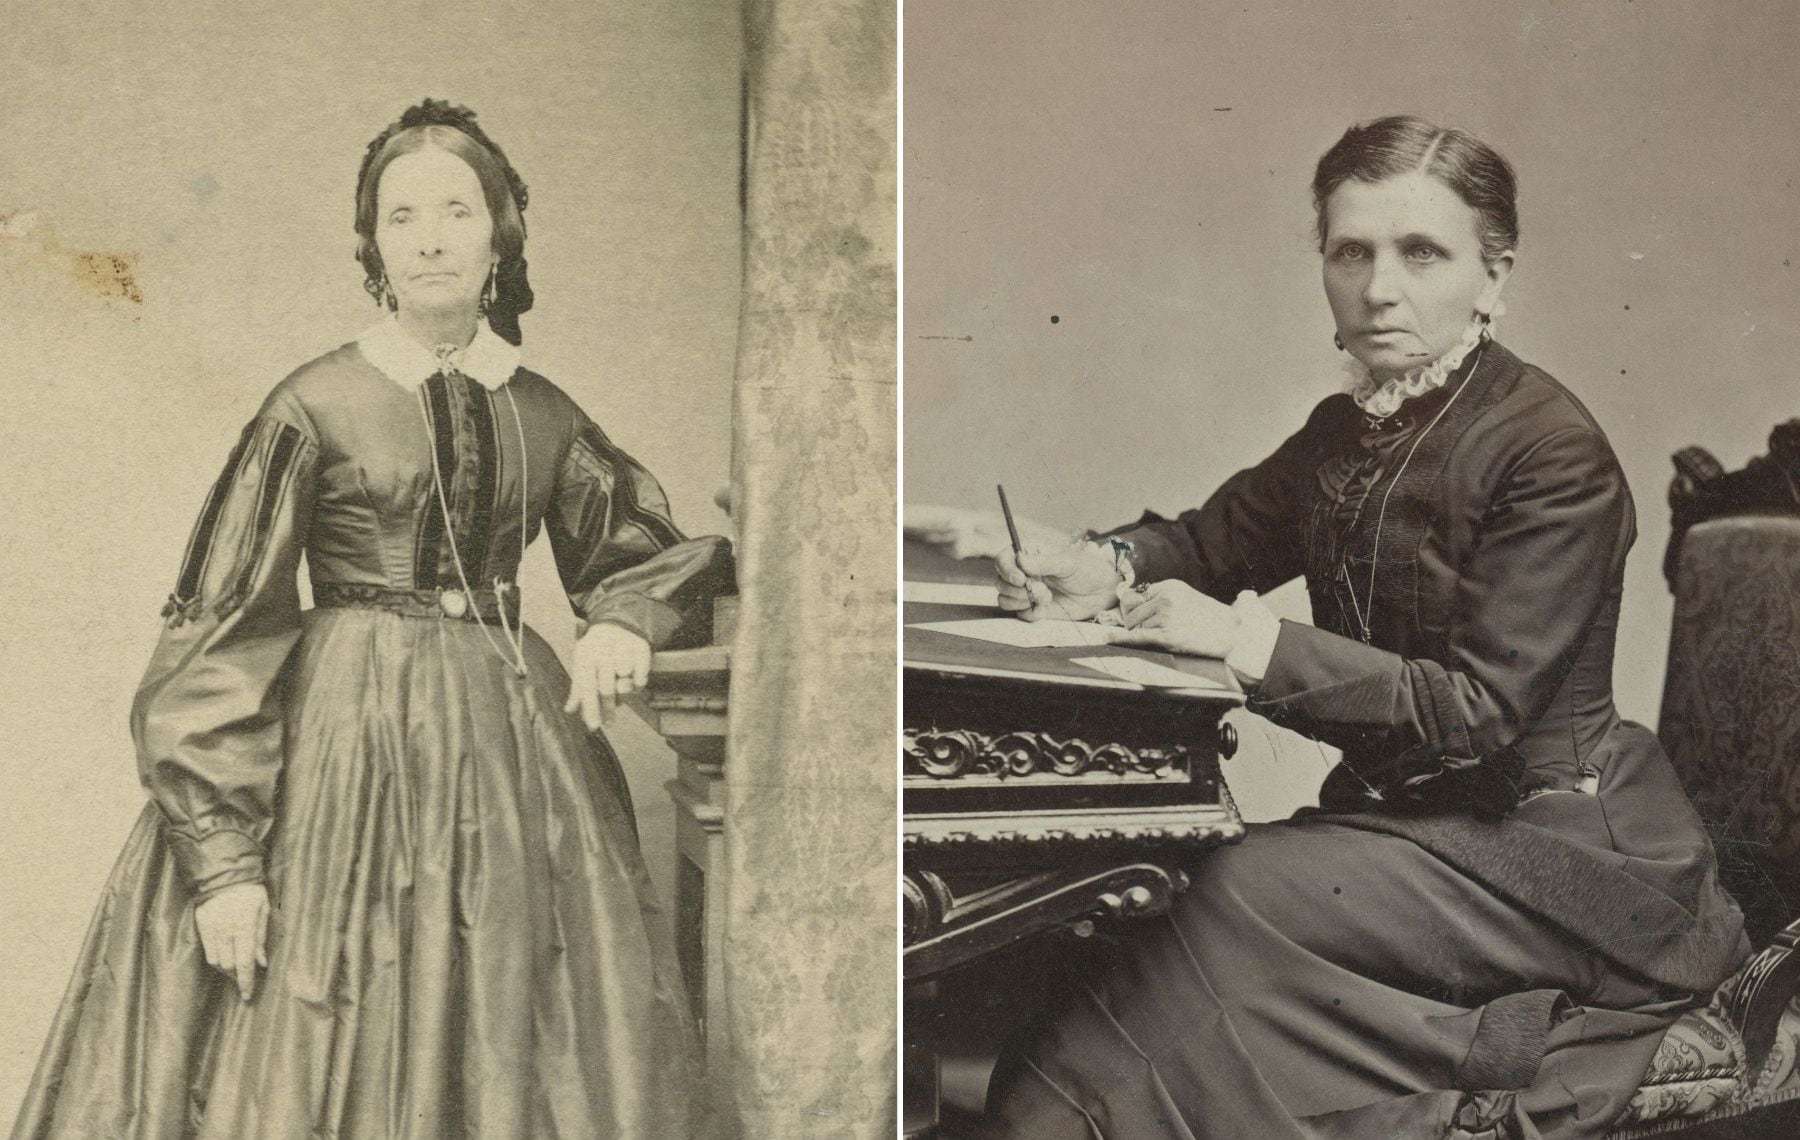 (The Church of Jesus Christ of Latter-day Saints) Historical photos of Eliza R. Snow, left, and Emmeline B. Wells. The Church History Department has published the diaries of the two prominent Latter-day Saint women. Inouye would like to see more such efforts for more women in the church.